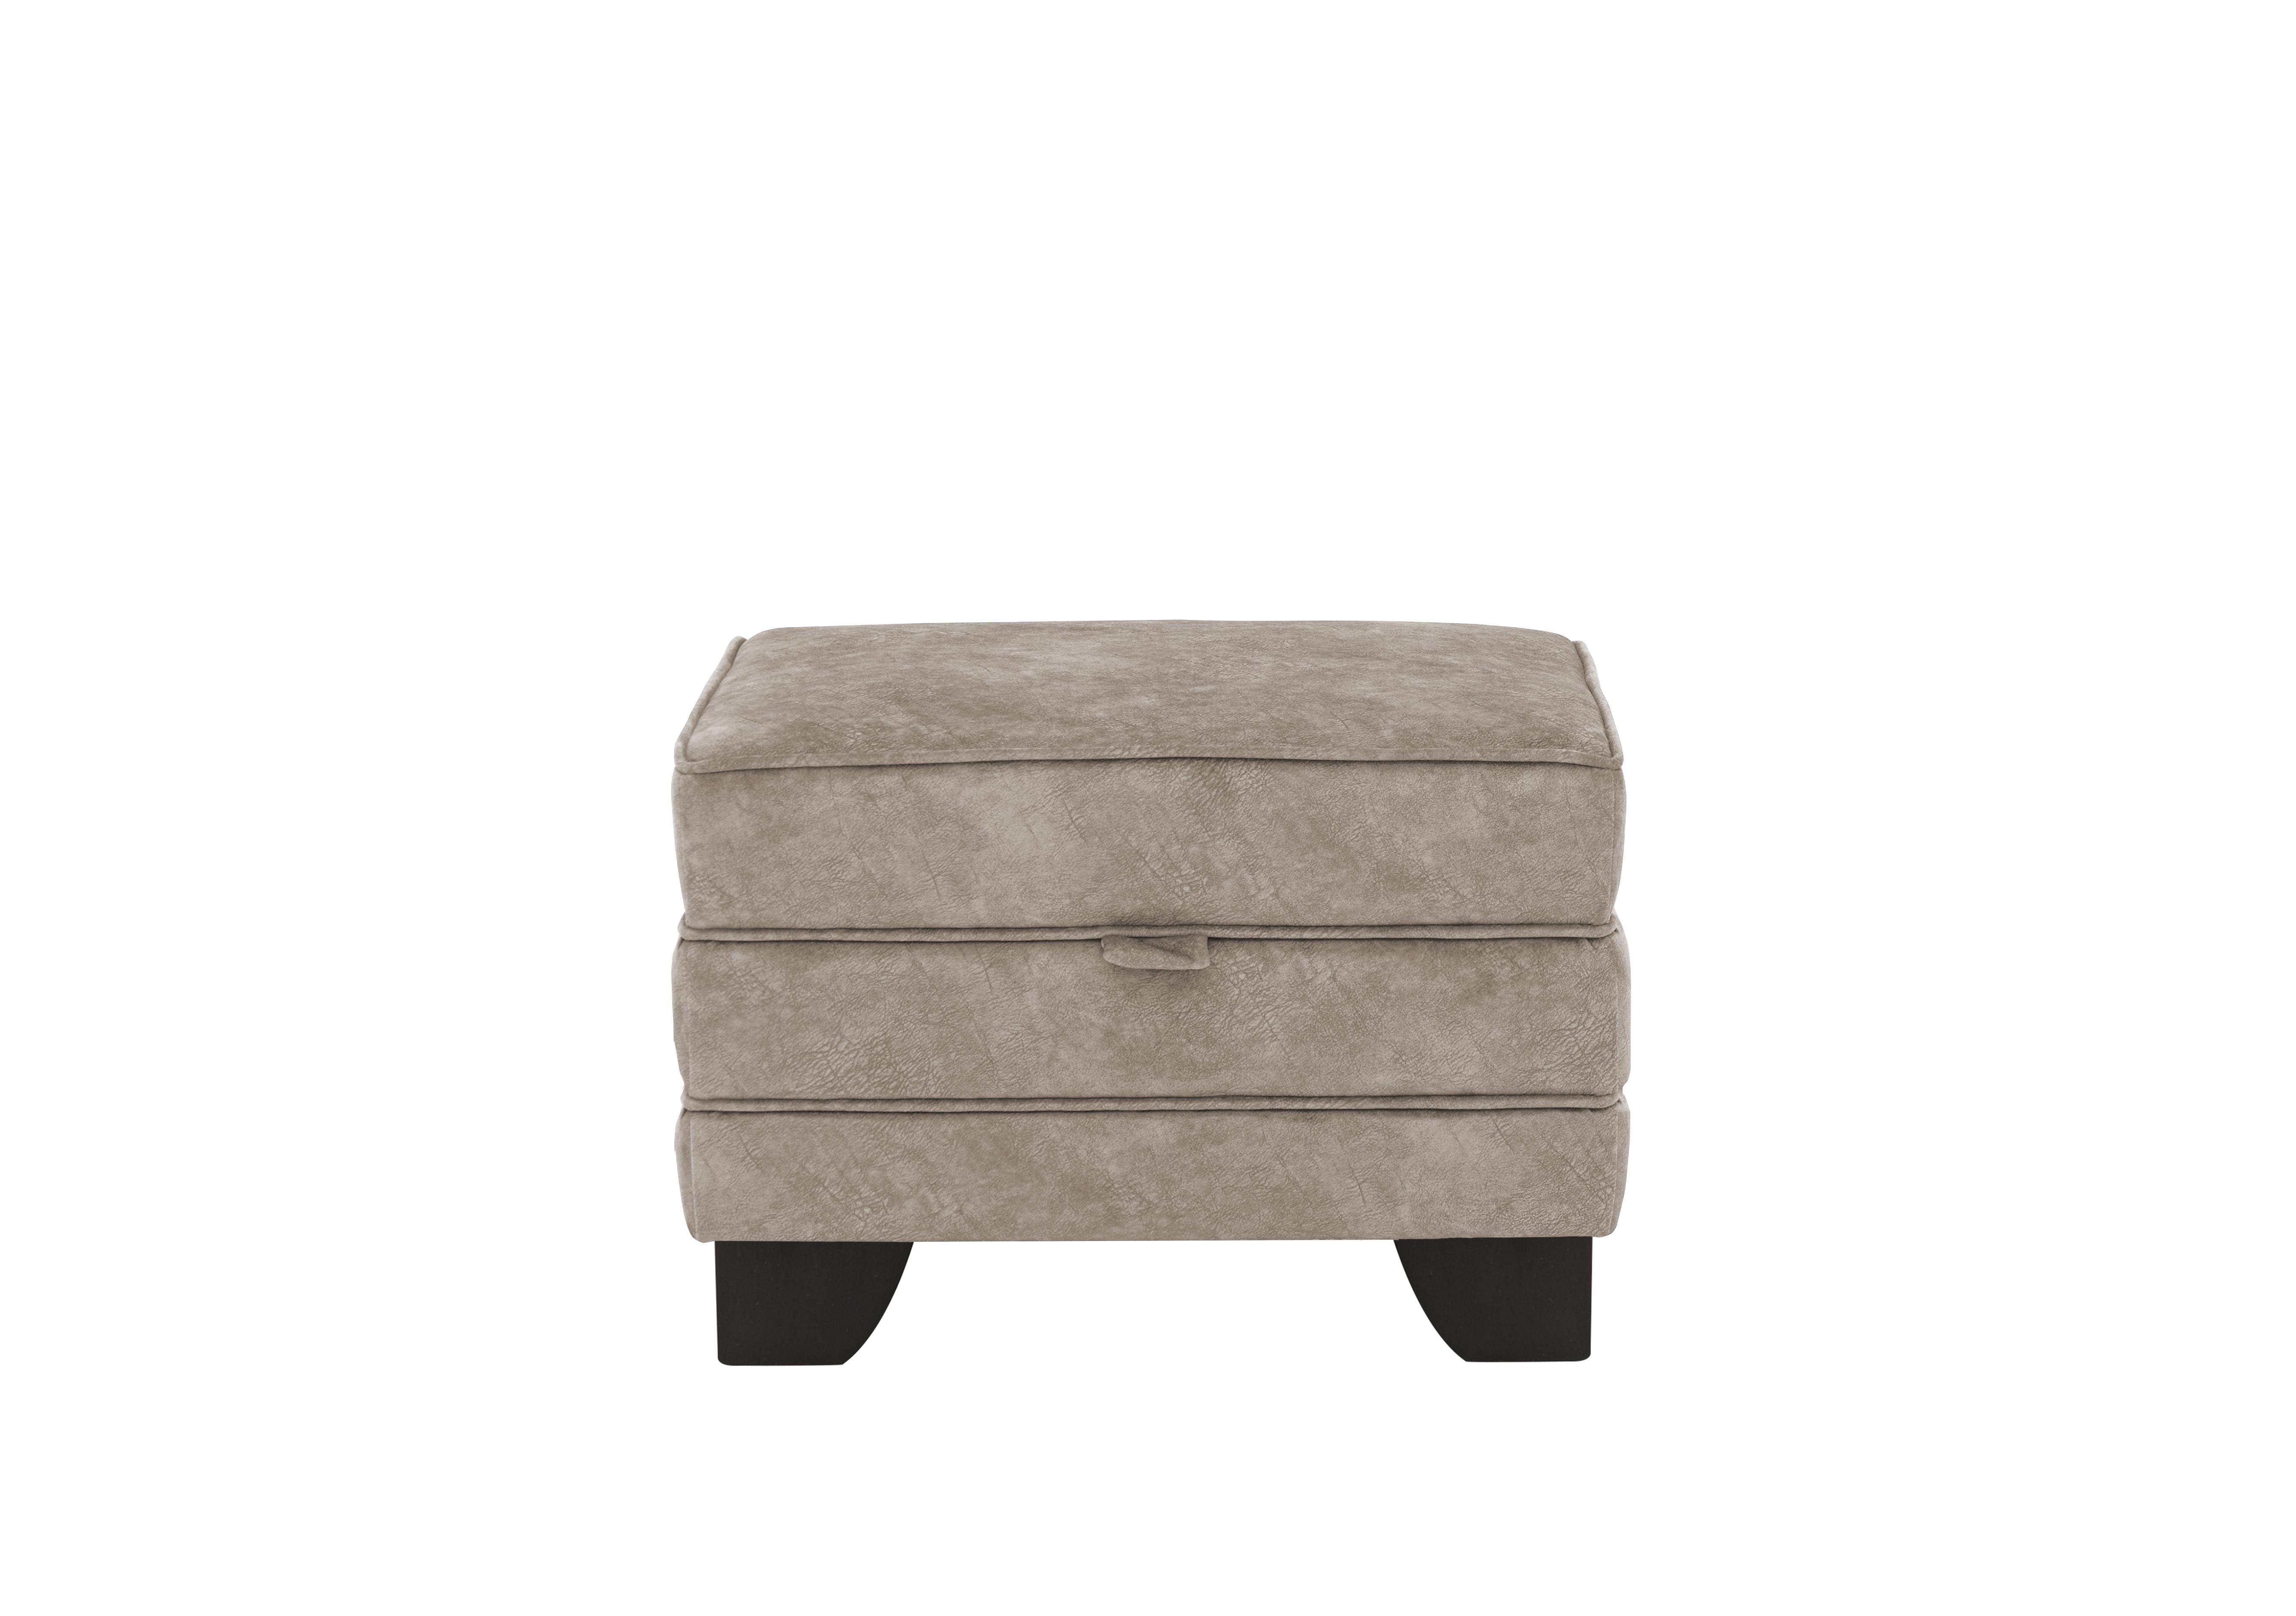 Ariana Small Storage Footstool in Dapple Oyster on Furniture Village